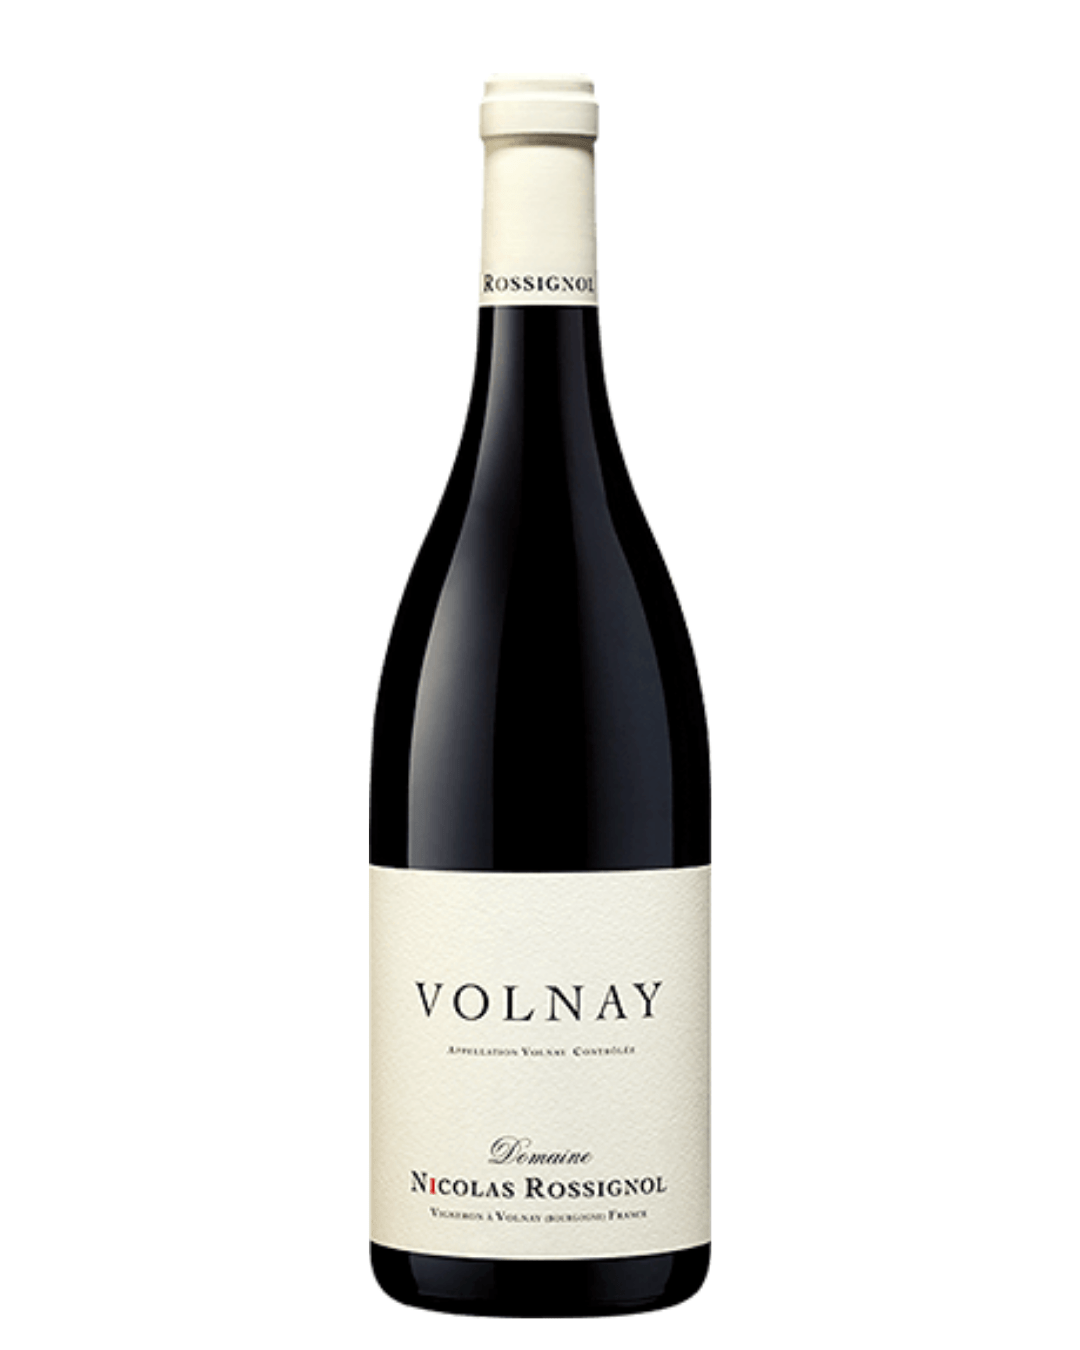 Shop Domaine Nicolas Rossignol Domaine Nicolas Rossignol Volnay 2017 online at PENTICTON artisanal French wine store in Hong Kong. Discover other French wines, promotions, workshops and featured offers at pentictonpacific.com 